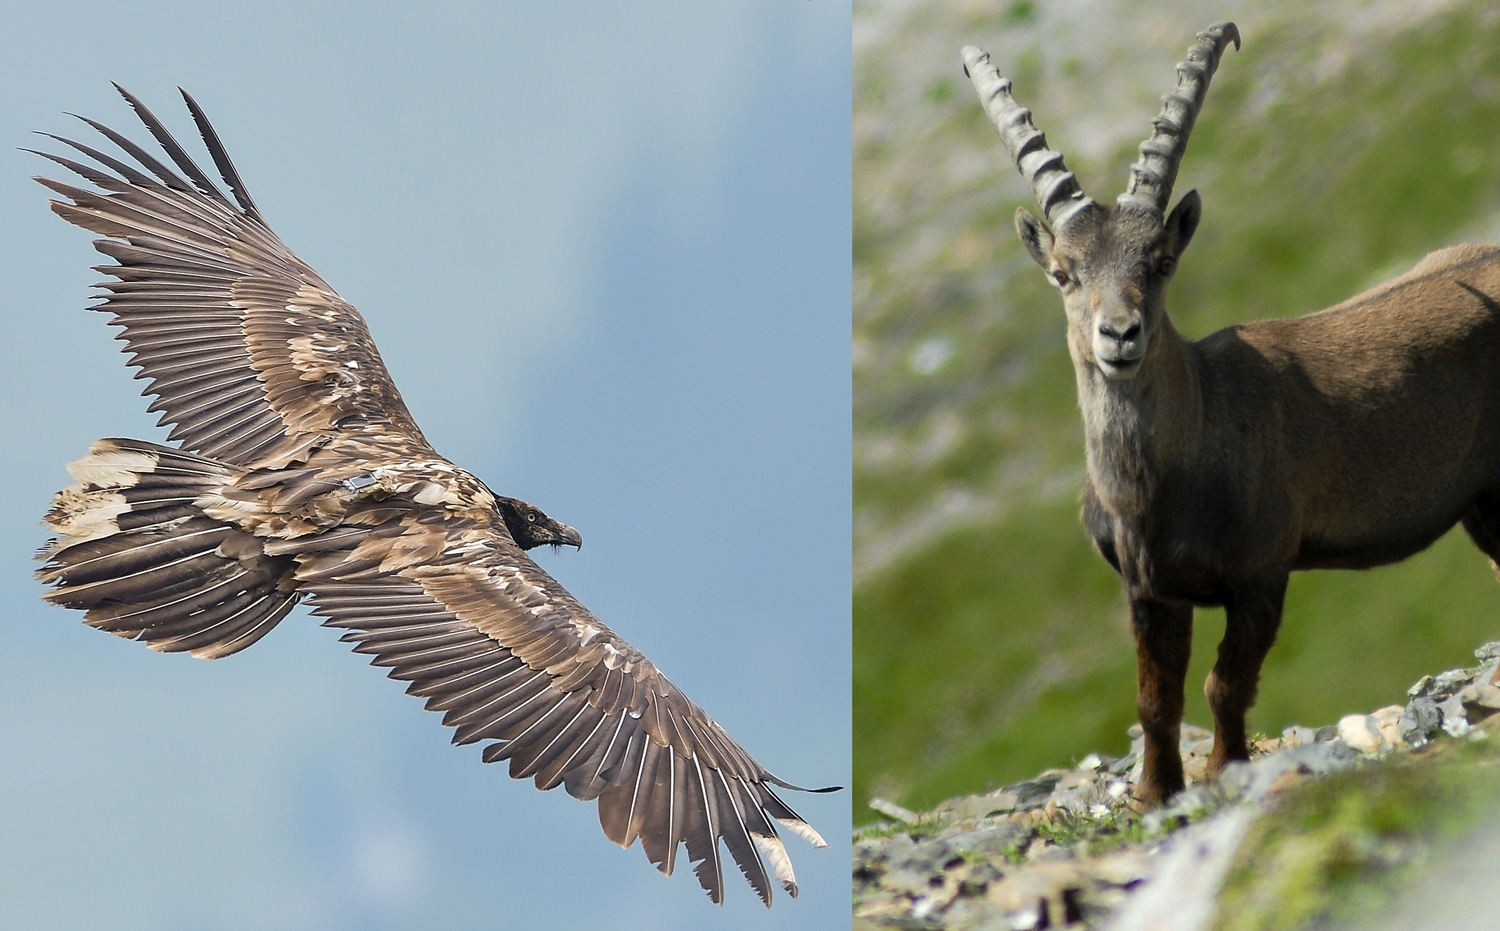 Bearded Vulture in flight with a GPS tag and a Alpine Ibex